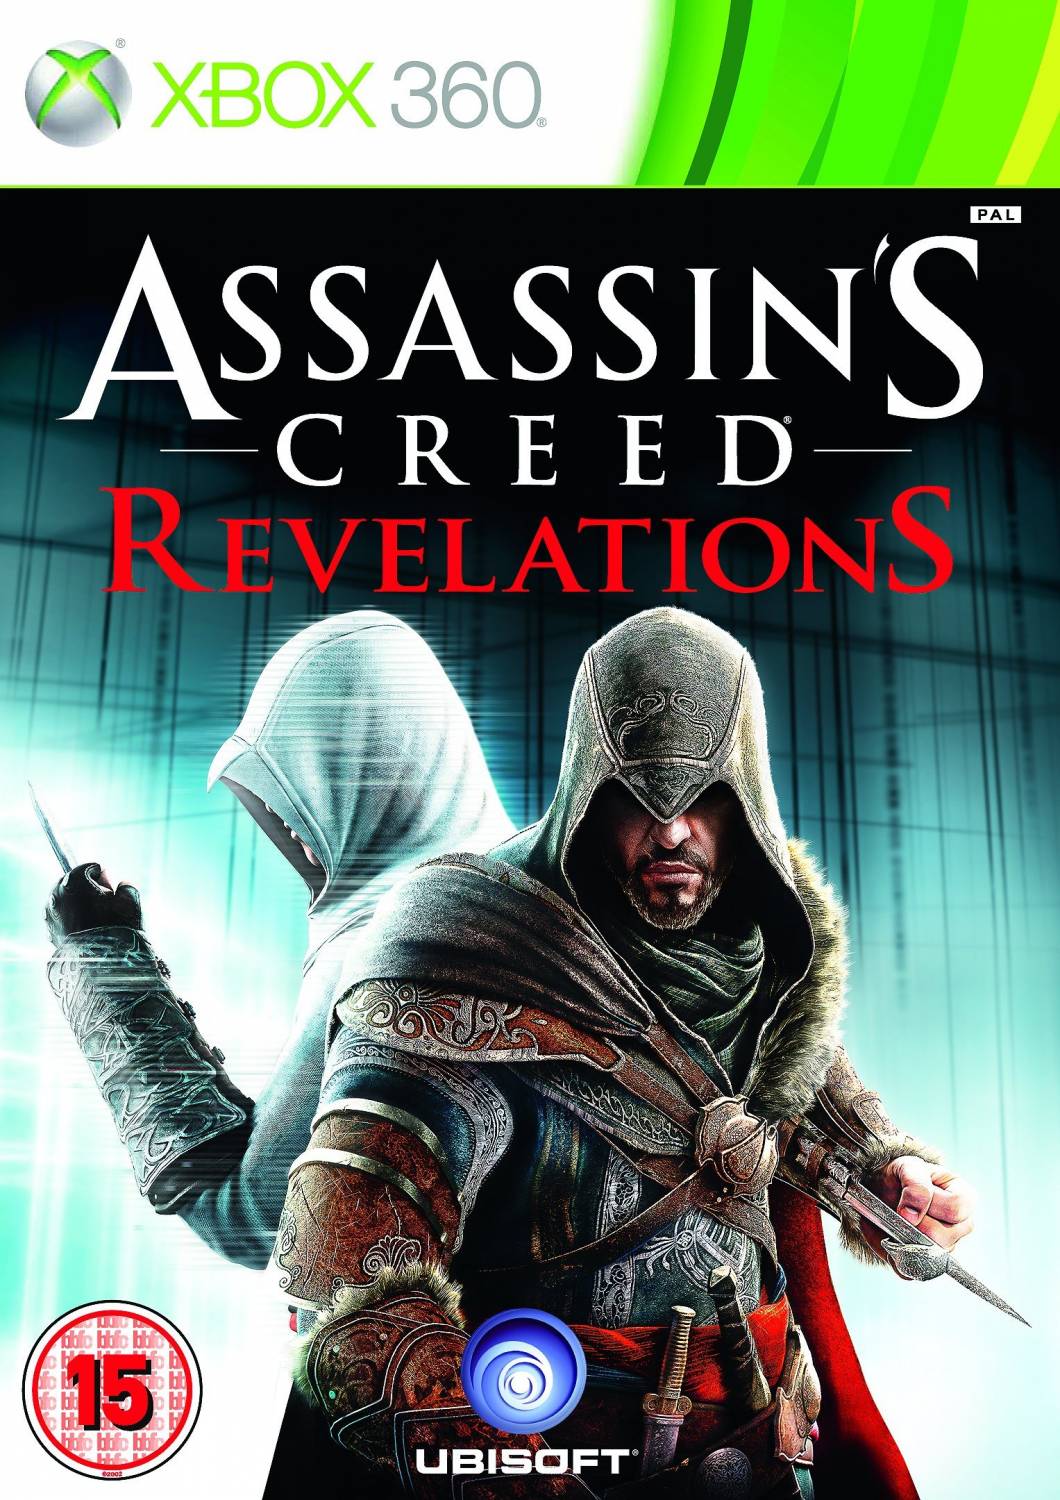 XBOX360 Assassin's Creed: Revelations [PAL][RUSSOUND]